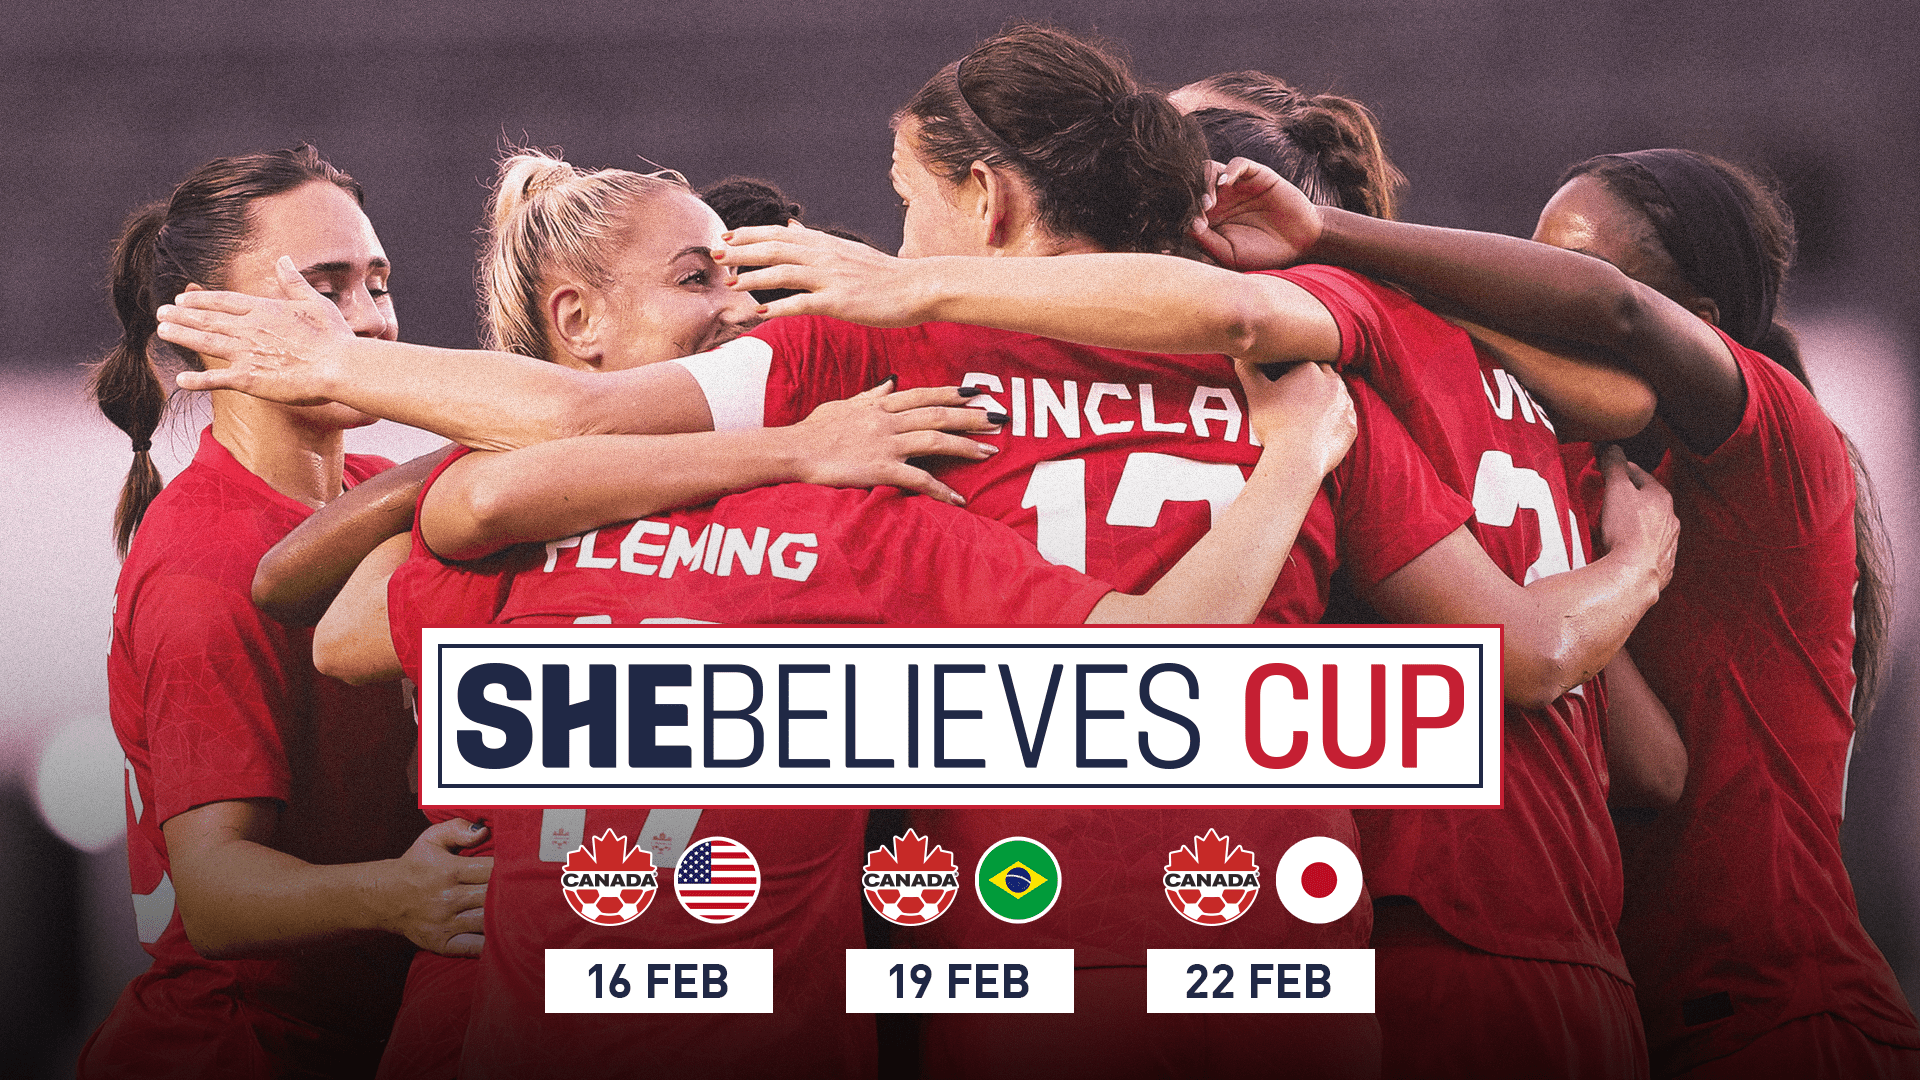 Canada Soccer’s Women’s National Team to feature in SheBelieves Cup in